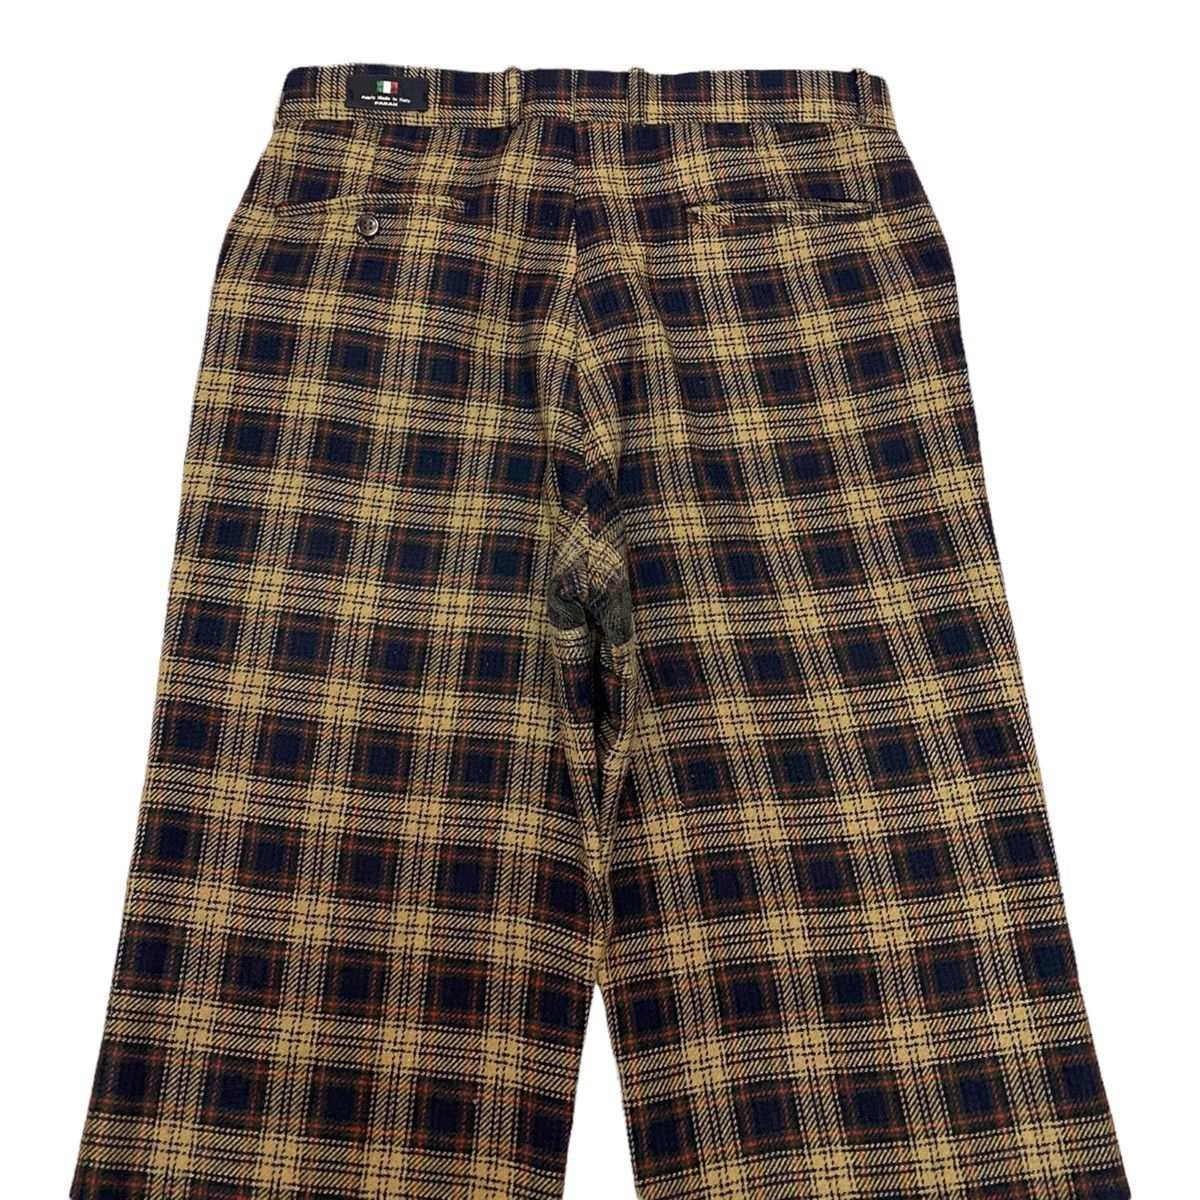 Archival Clothing - 🔥FARAH AW1998 CHECKED PLAID WOOL PANTS MADE IN ITALY - 8